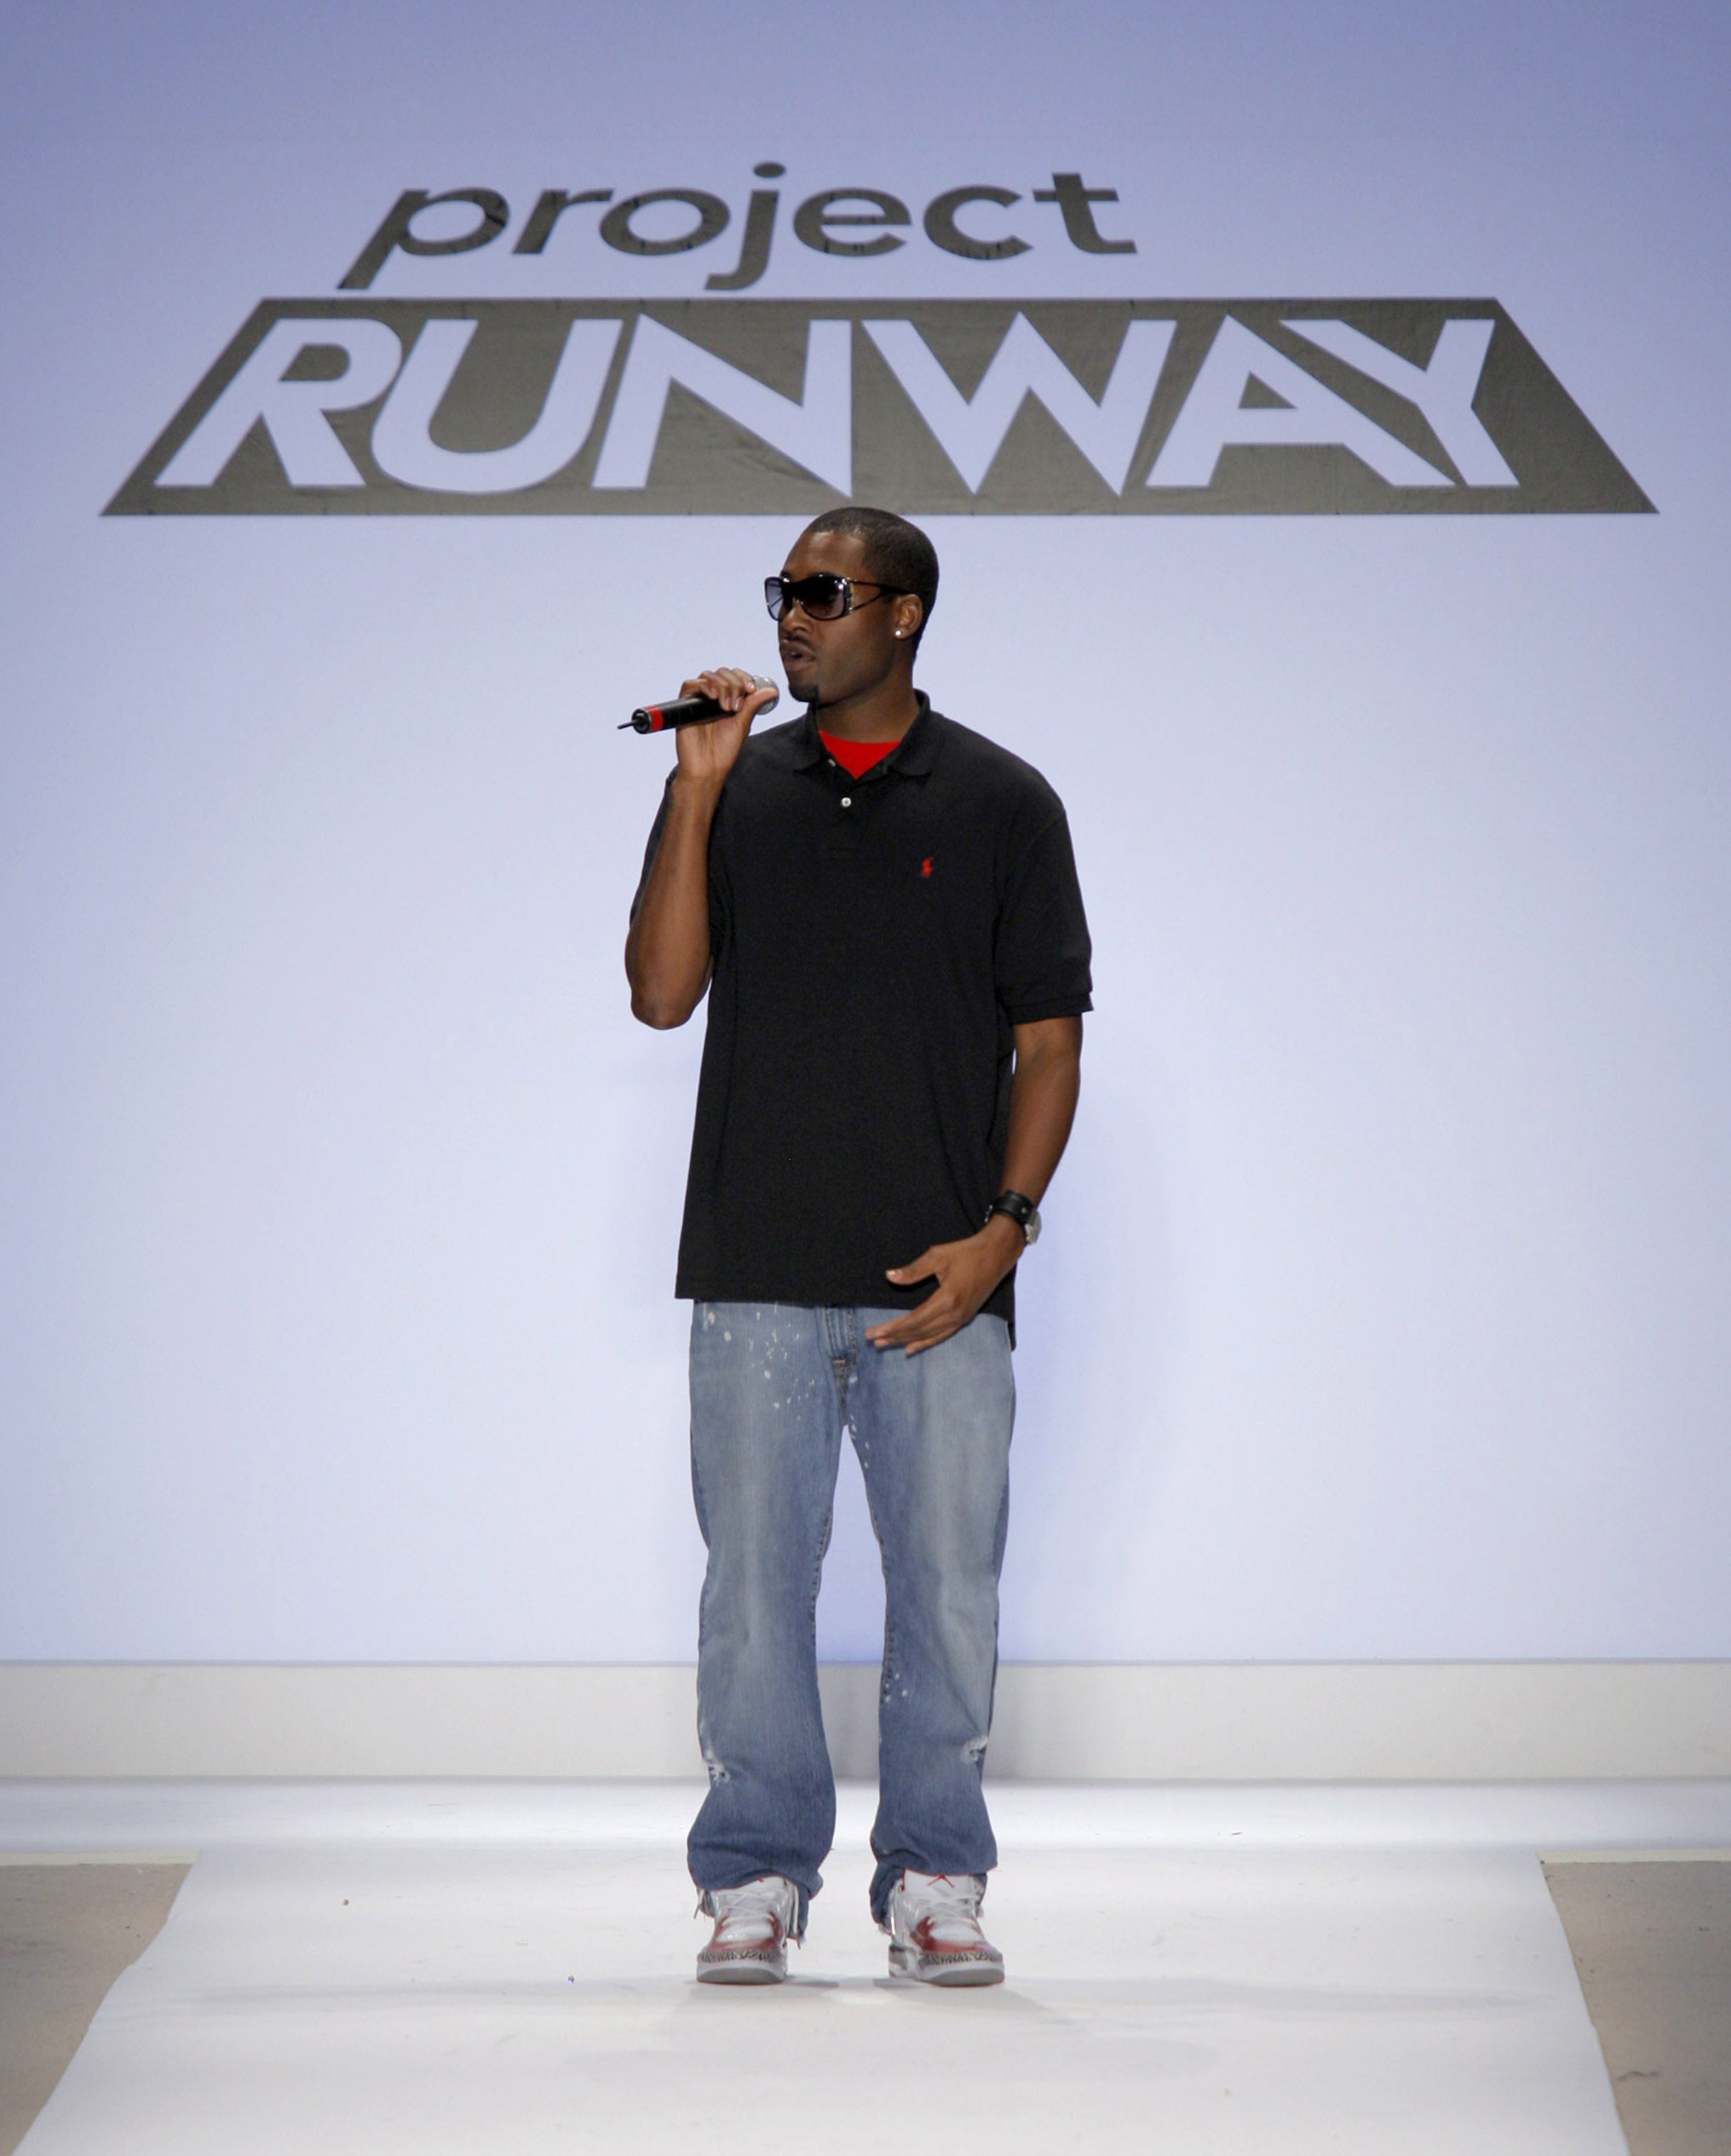 Remembering Mychael Knight: 9 Things To Know About The 'Project Runway' Finalist Gone Too Soon
